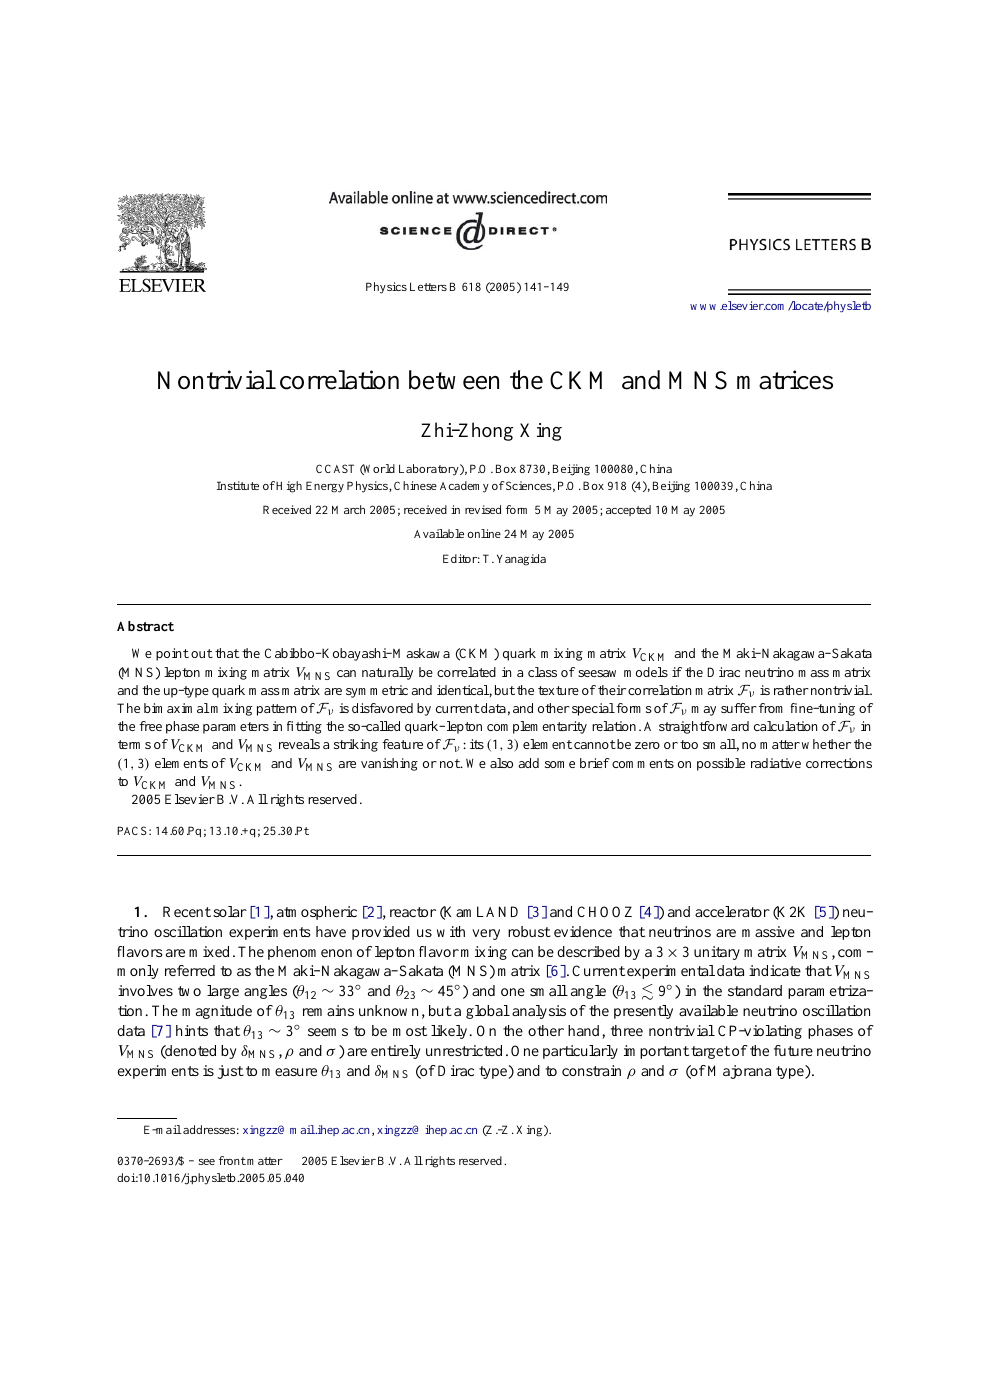 Nontrivial Correlation Between The Ckm And Mns Matrices Topic Of Research Paper In Physical Sciences Download Scholarly Article Pdf And Read For Free On Cyberleninka Open Science Hub